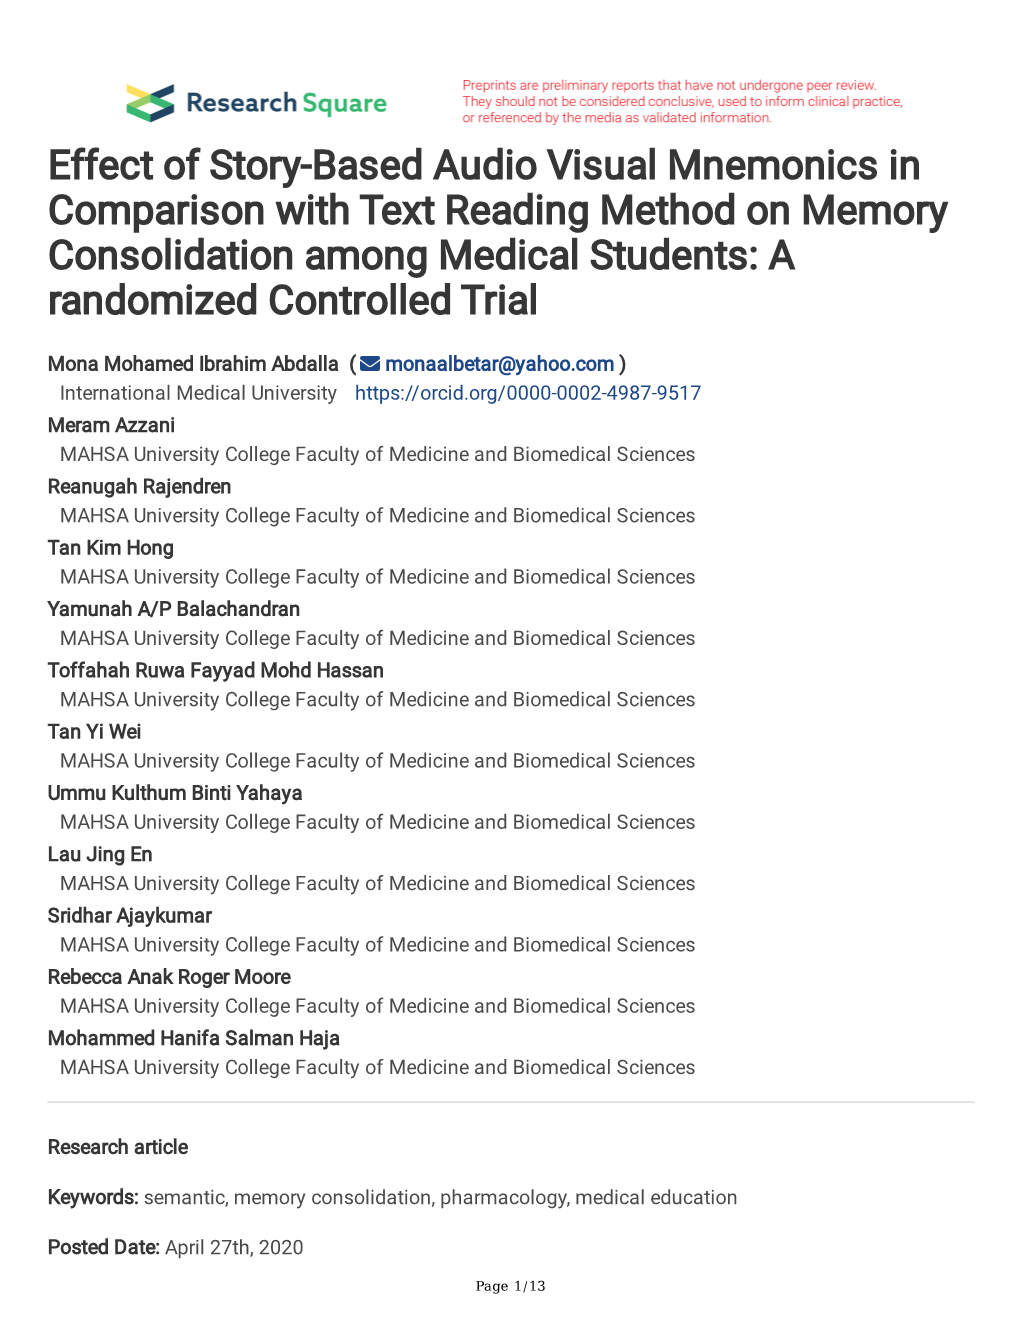 Effect of Story-Based Audio Visual Mnemonics in Comparison with Text Reading Method on Memory Consolidation Among Medical Students: a Randomized Controlled Trial